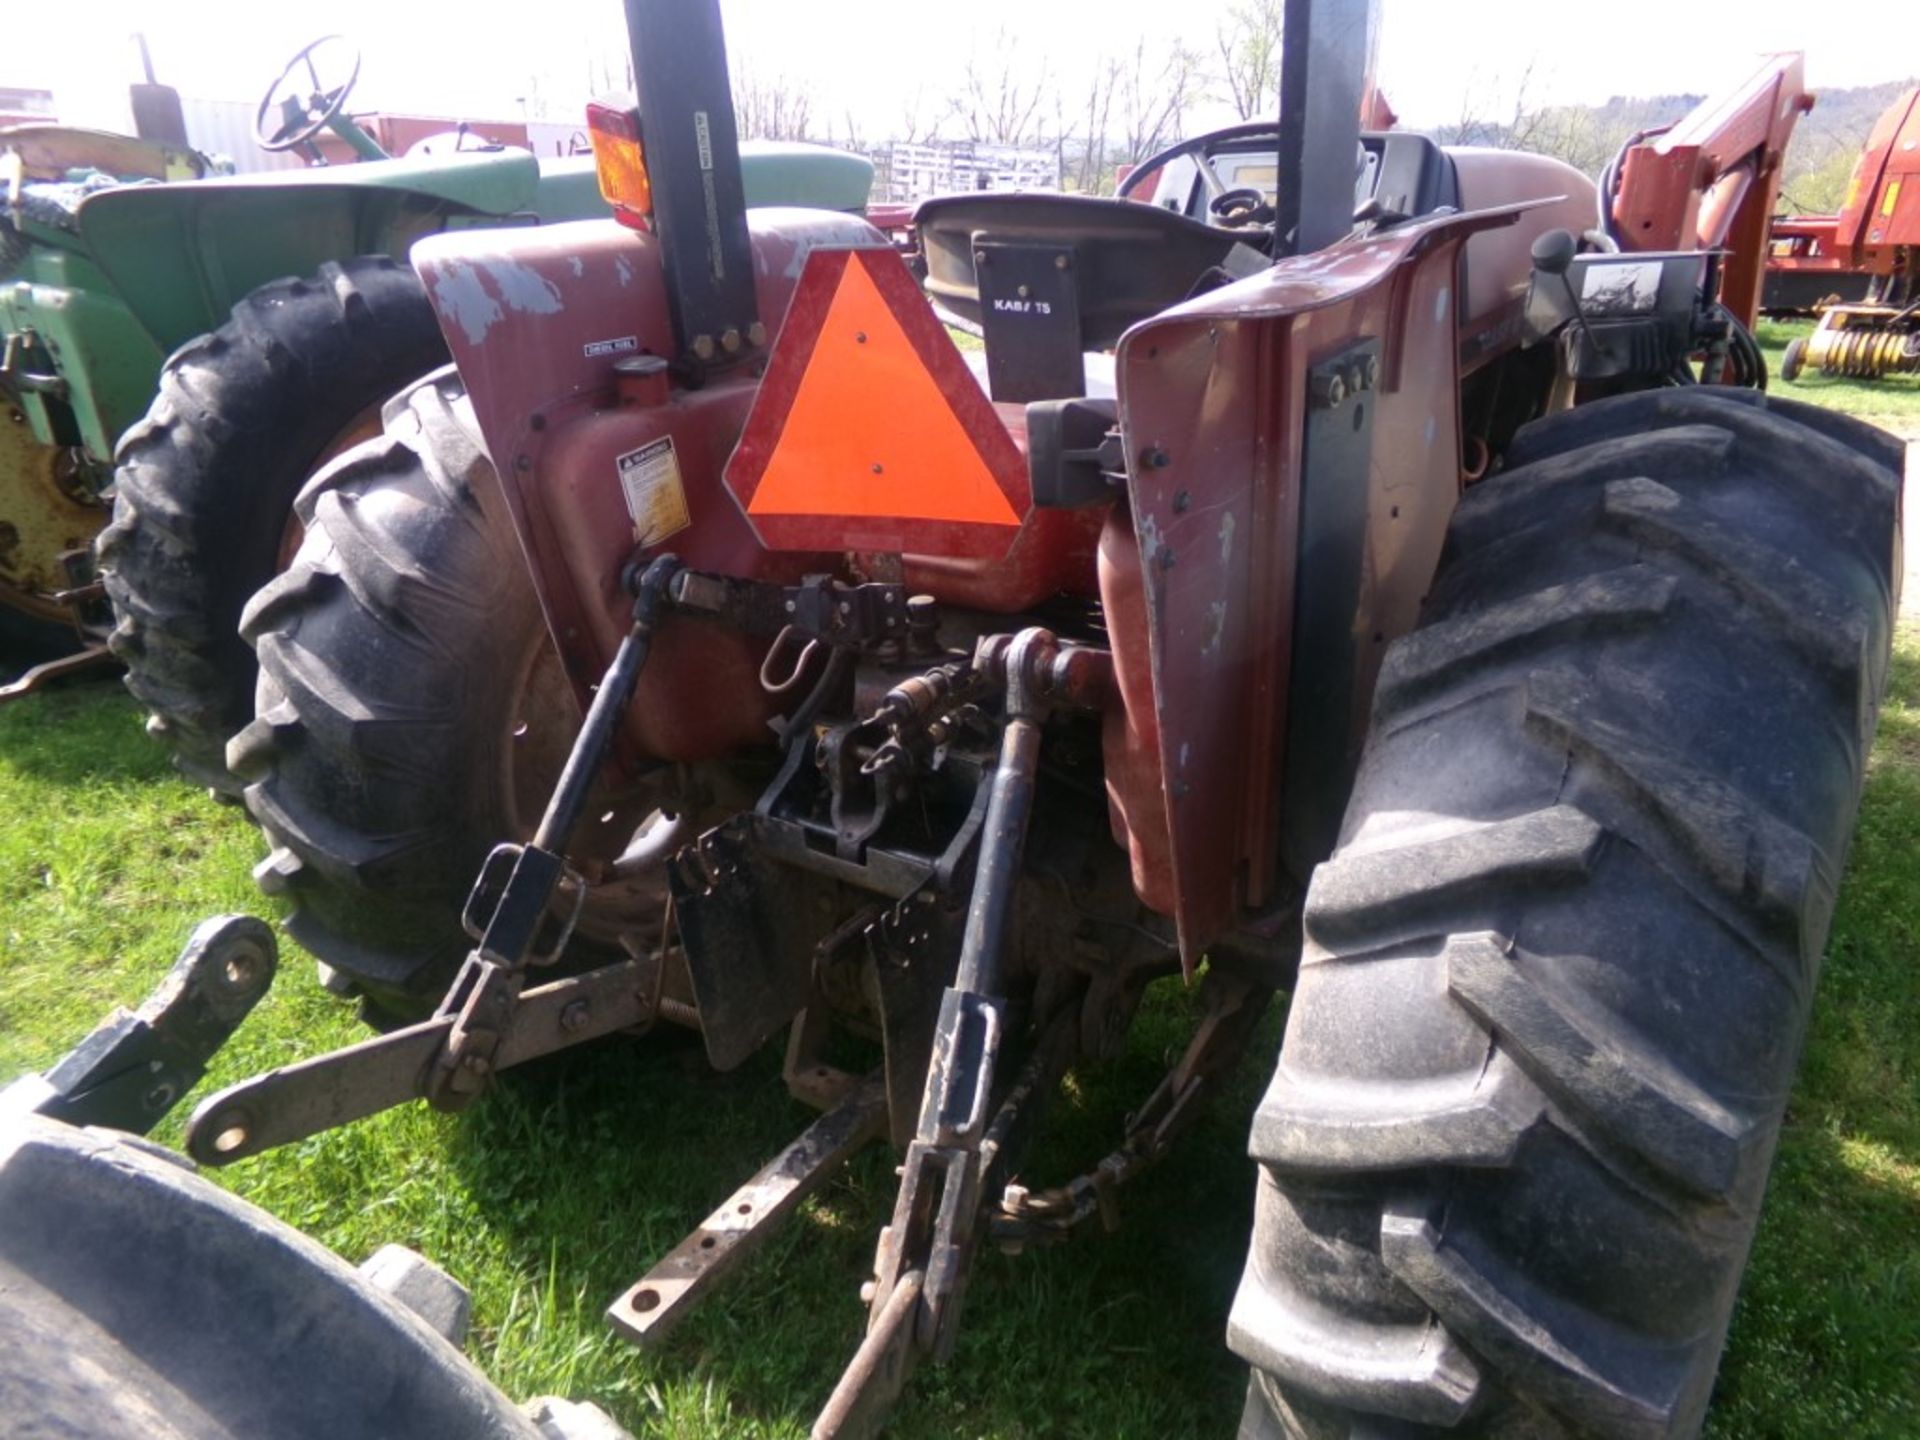 Case IH C-50 Tractor with Great Bend 300 Loader, 4 WD, NOT RUNNING-NEEDS WORK (4366) - Image 3 of 3